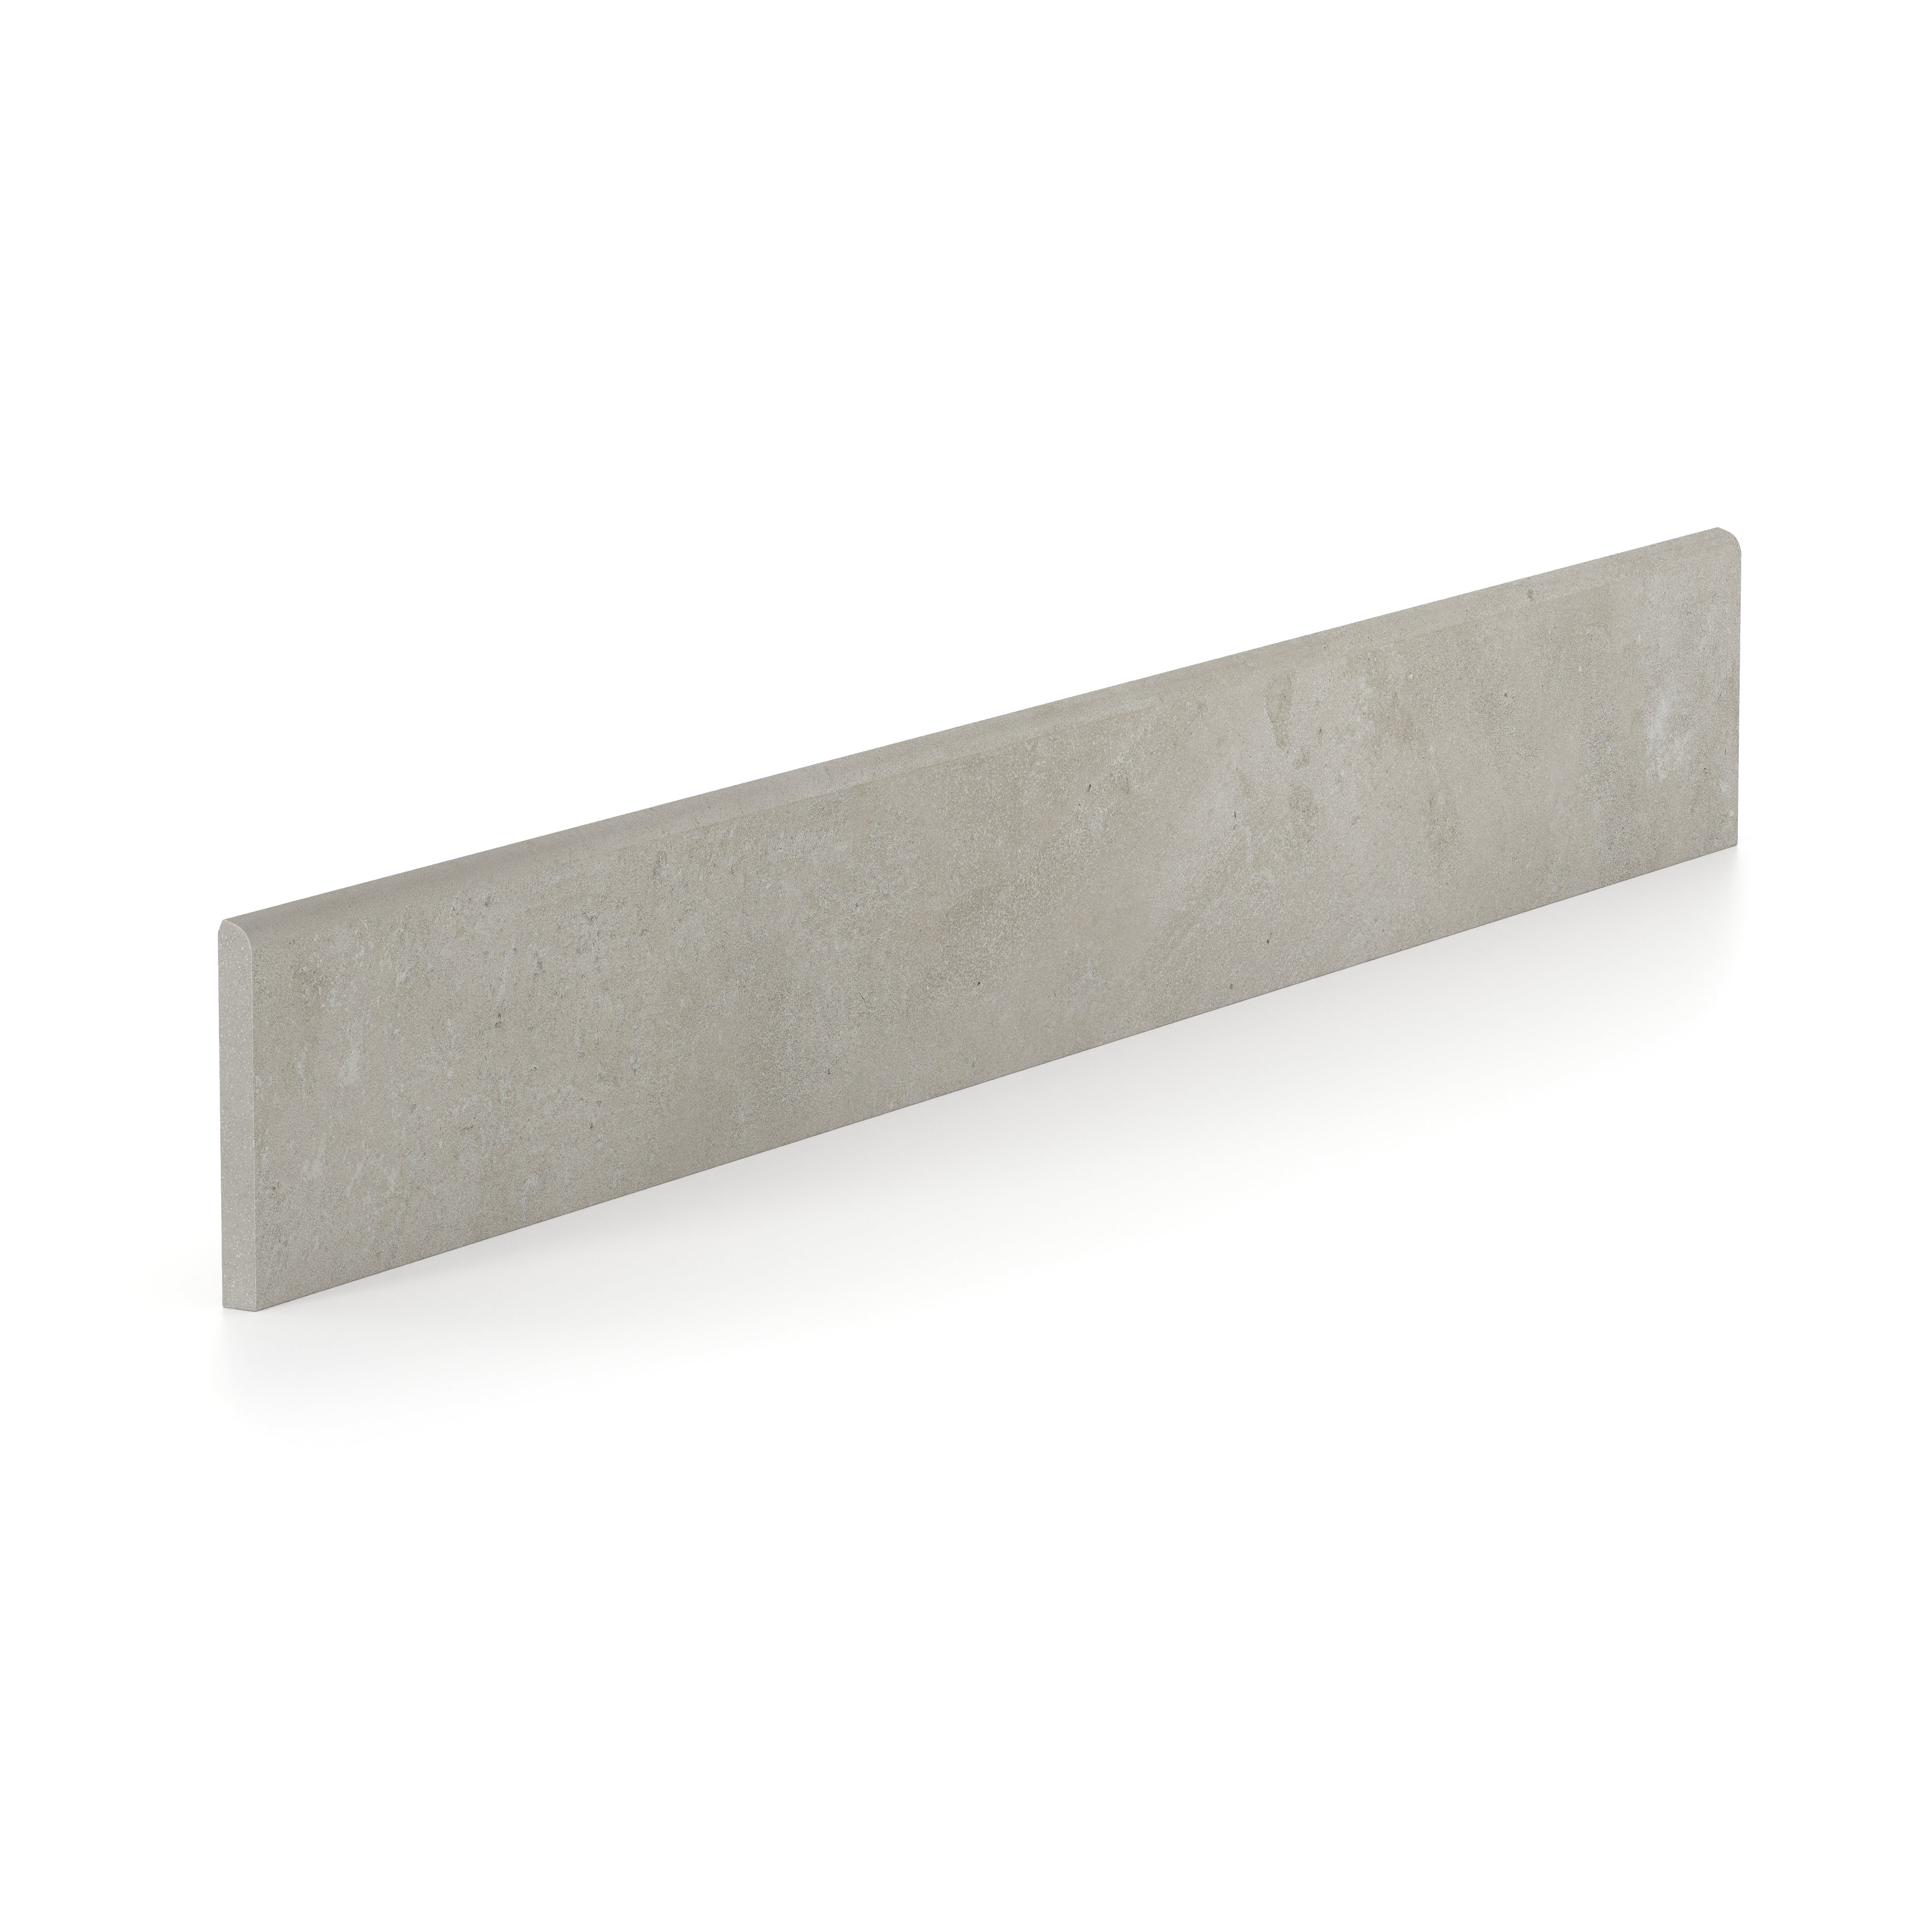 Ramsey 3x24 Polished Porcelain Bullnose Tile in Putty